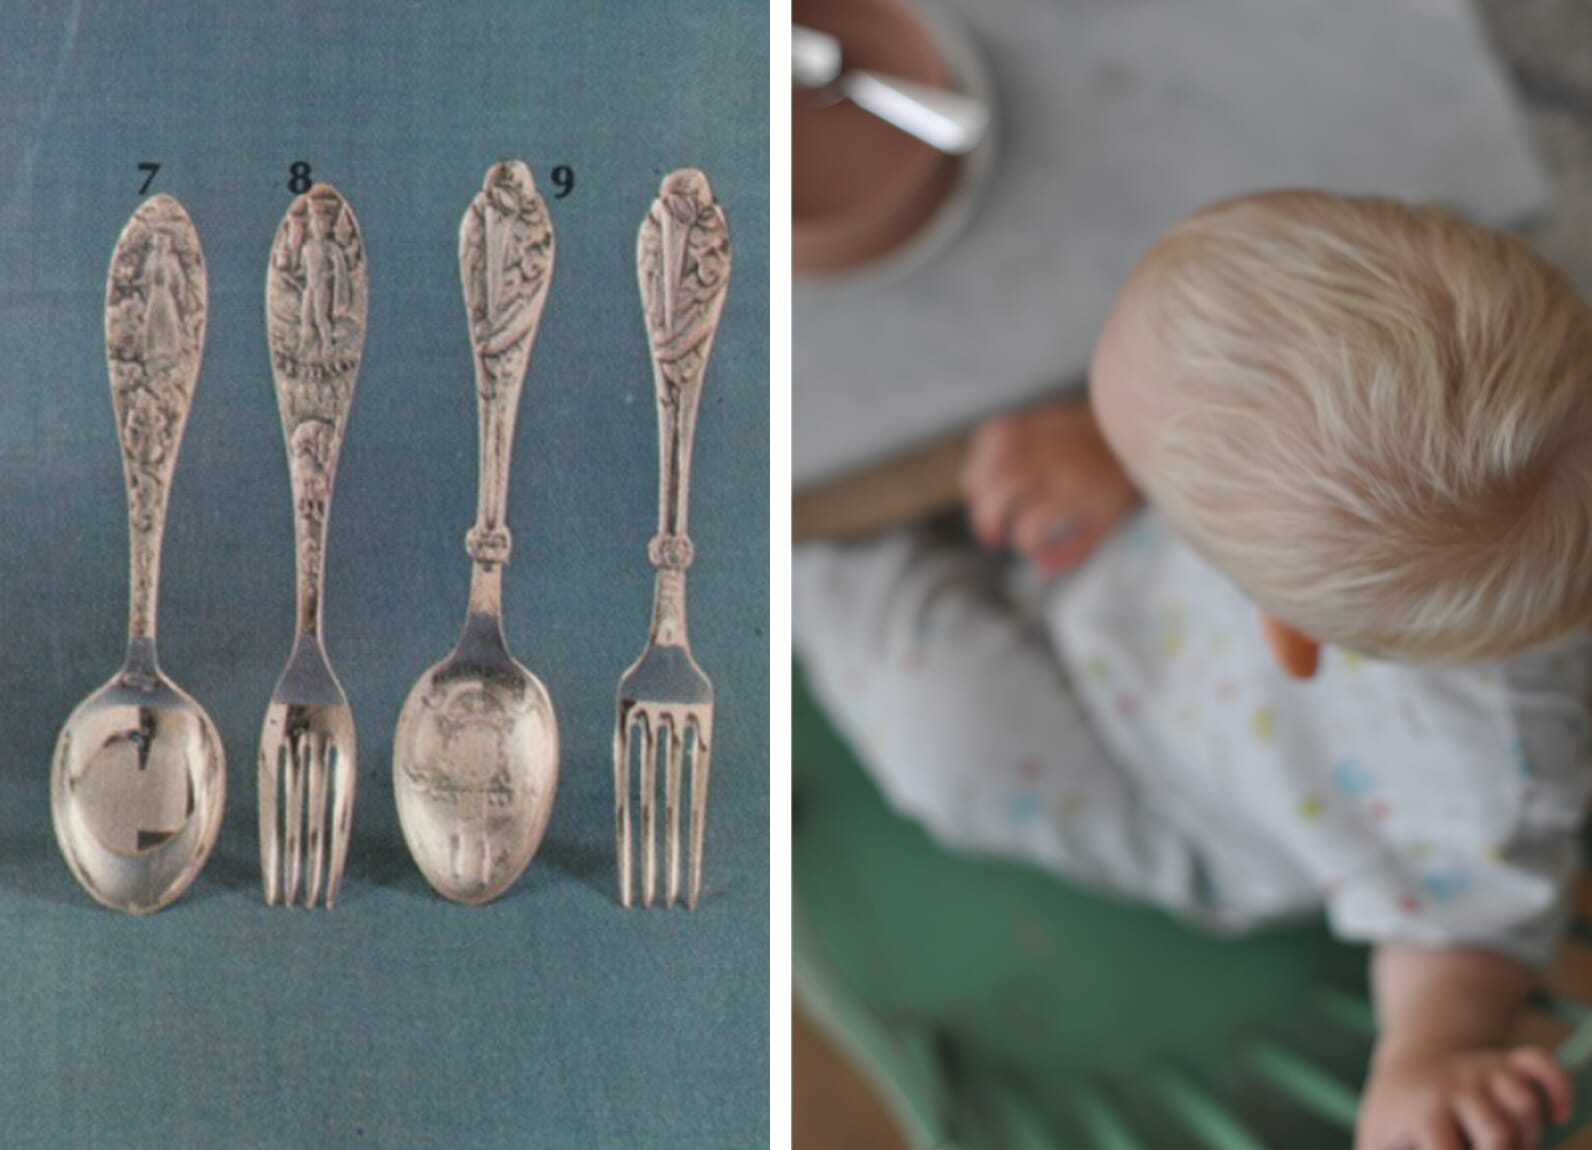 Why to Use Silver Items (Utensils) for Feeding Babies?